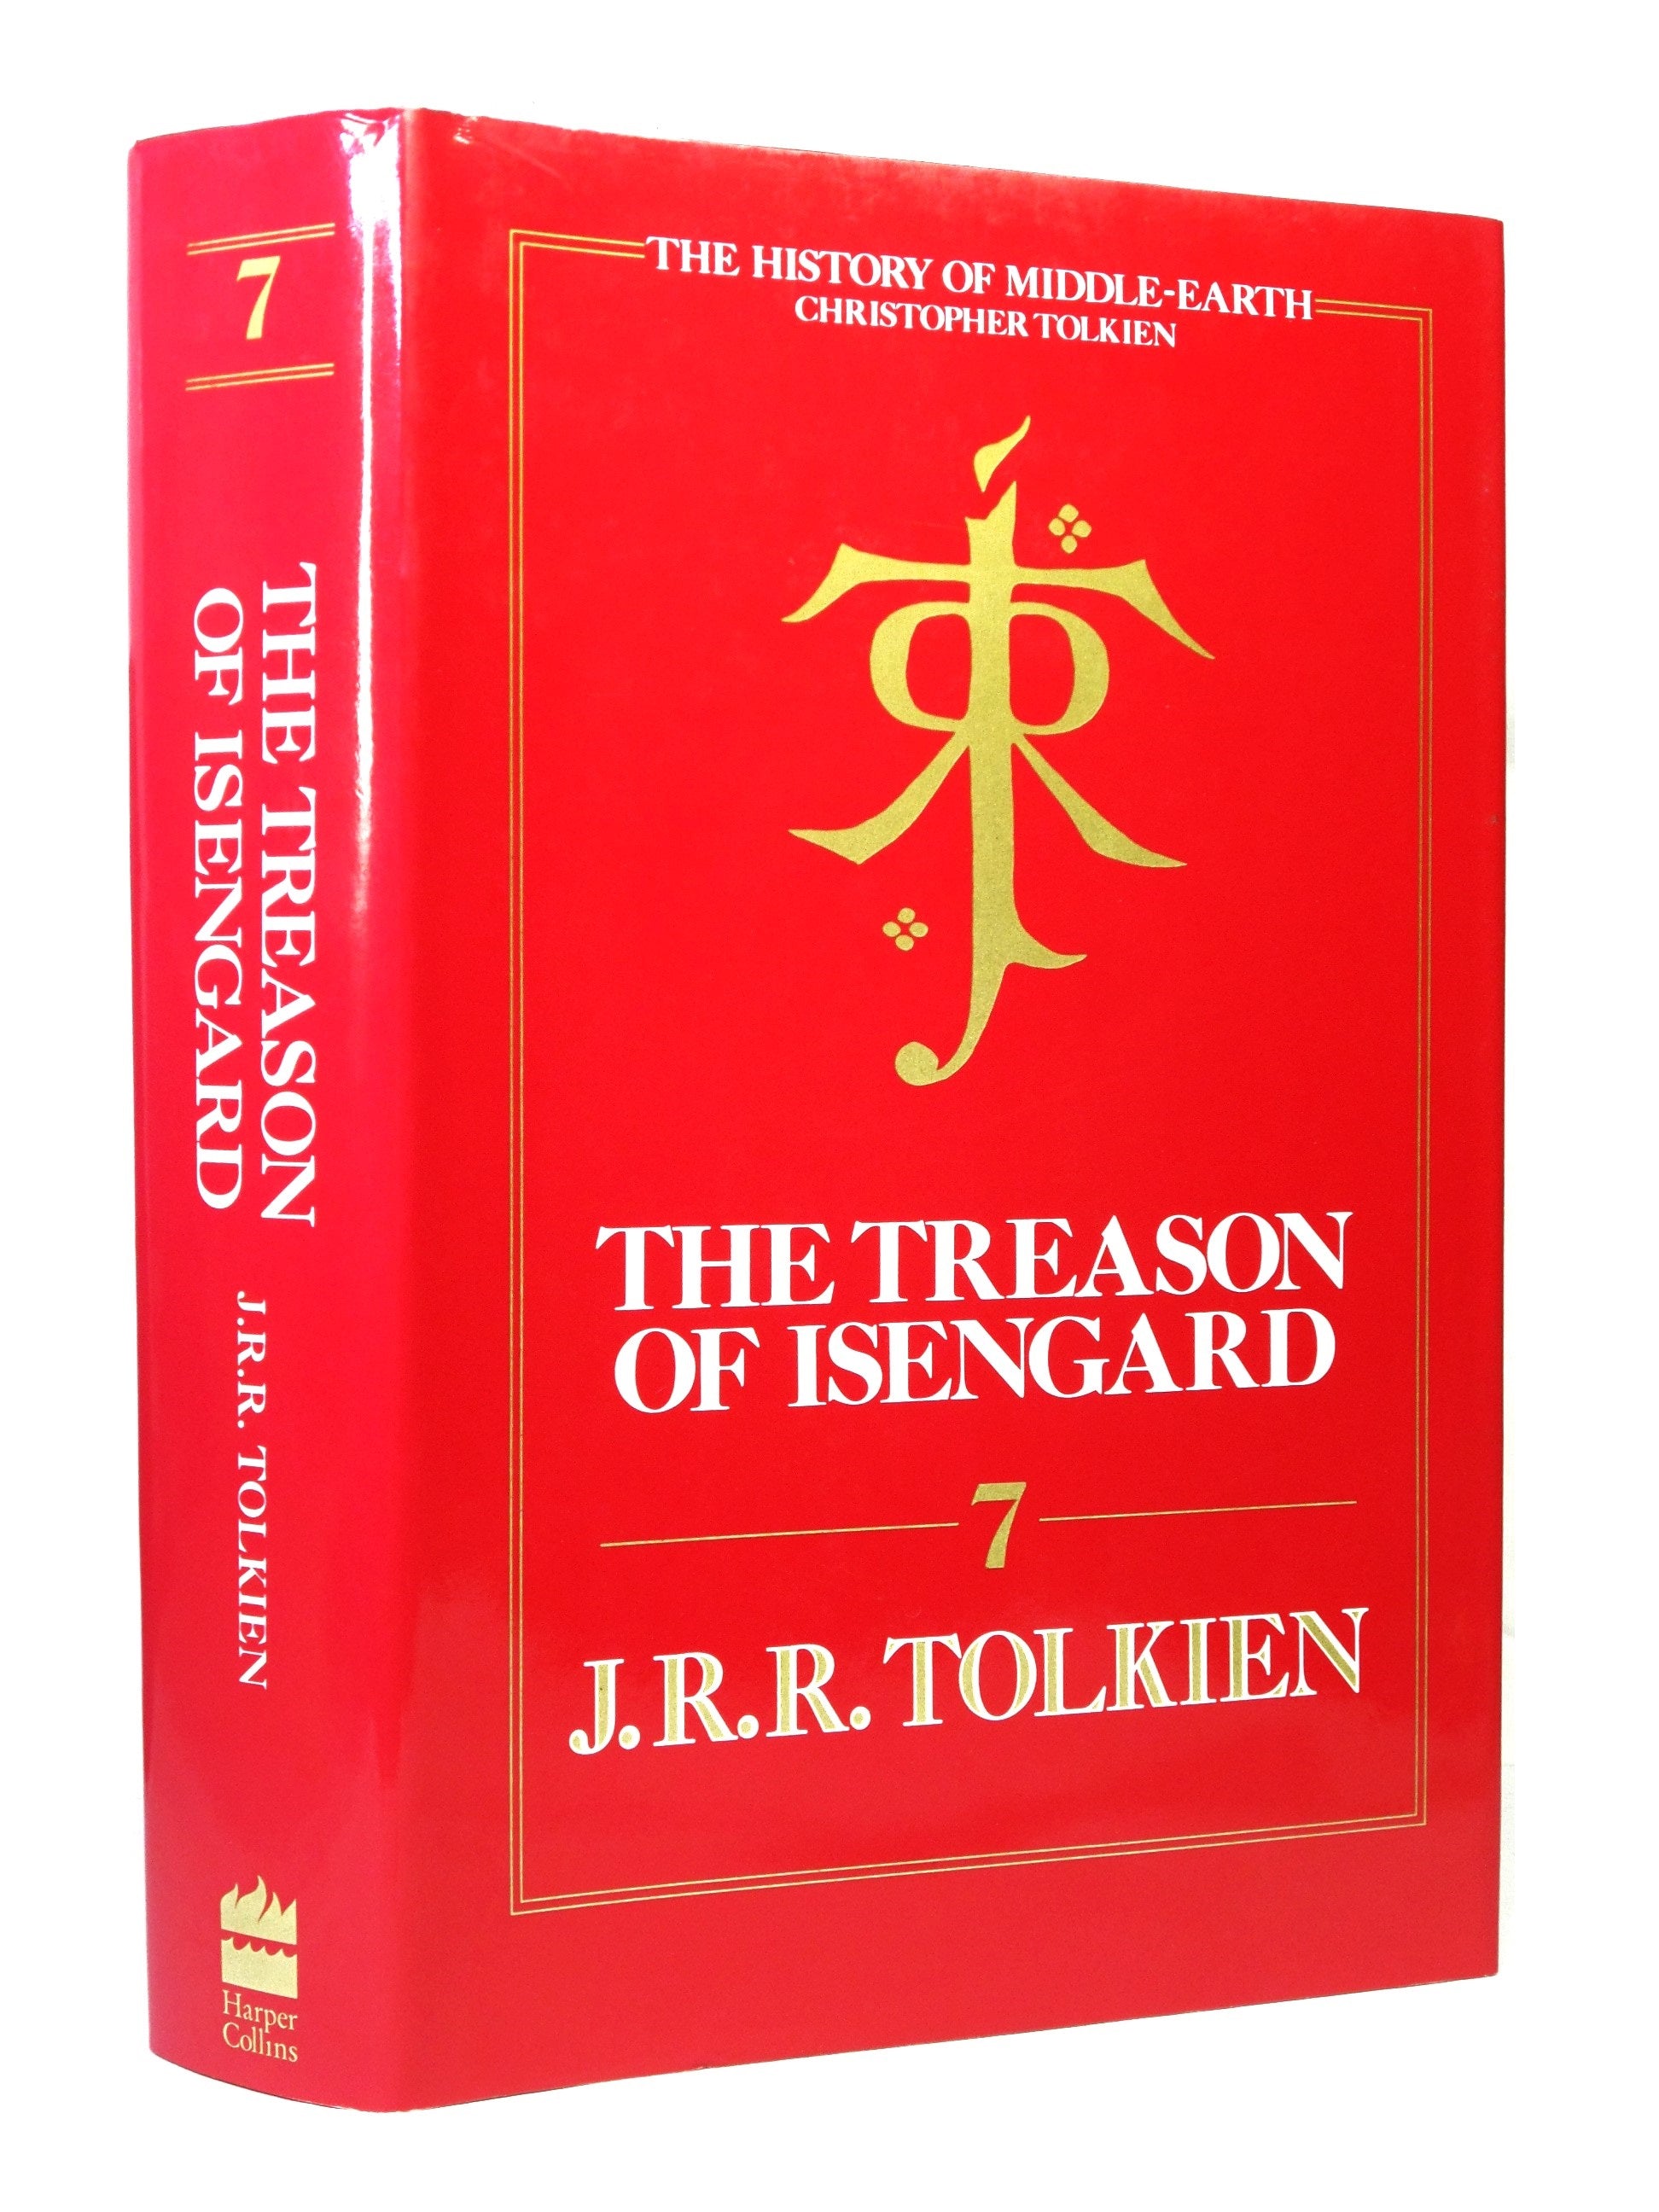 THE TREASON OF ISENGARD BY J.R.R. TOLKIEN 1991 HARDCOVER